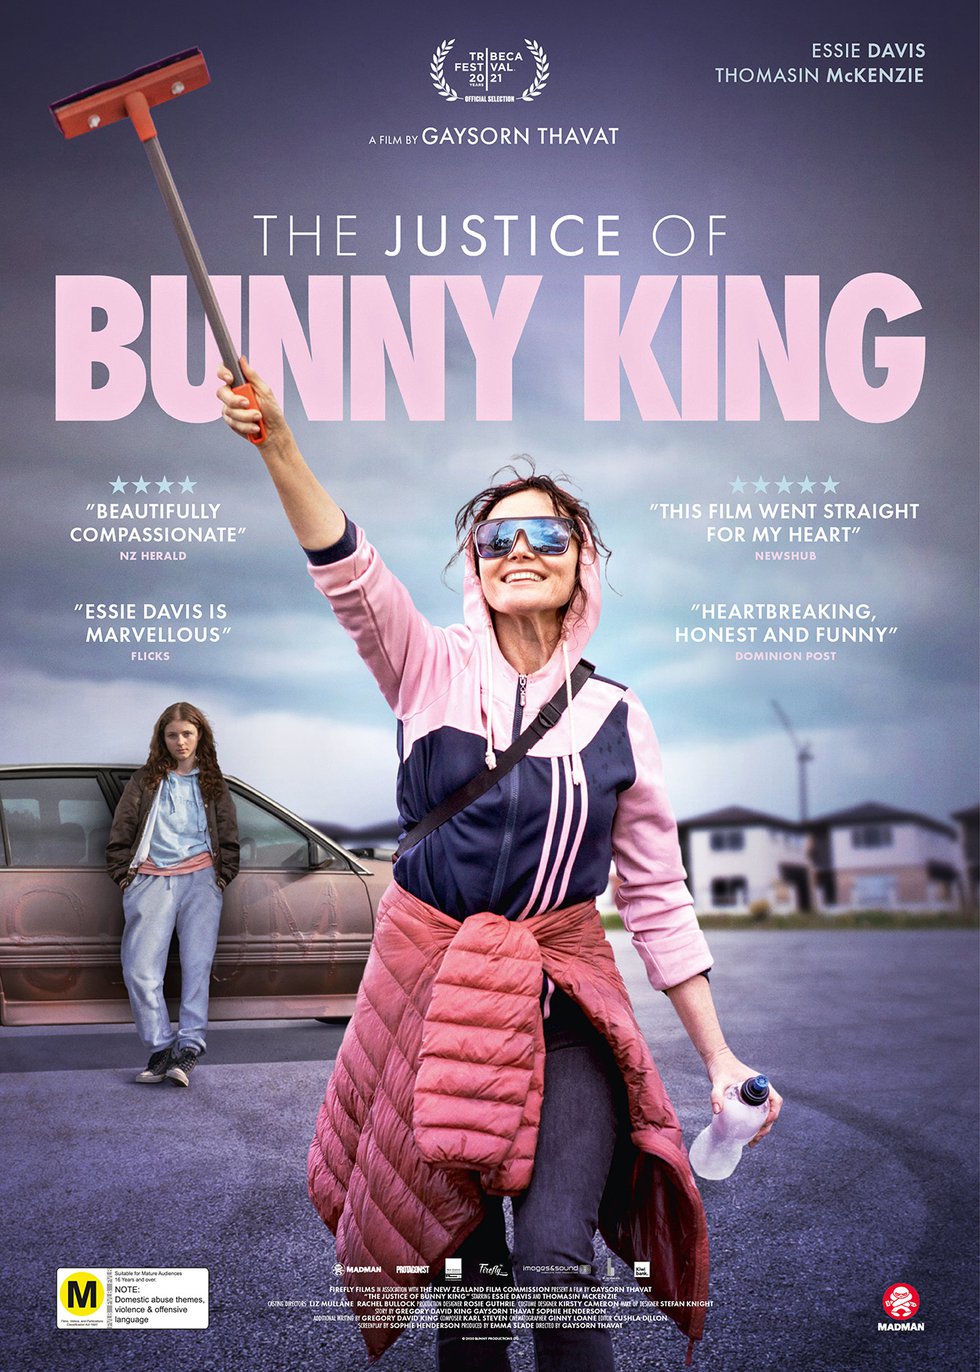 The Justice of Bunny King Drama Film